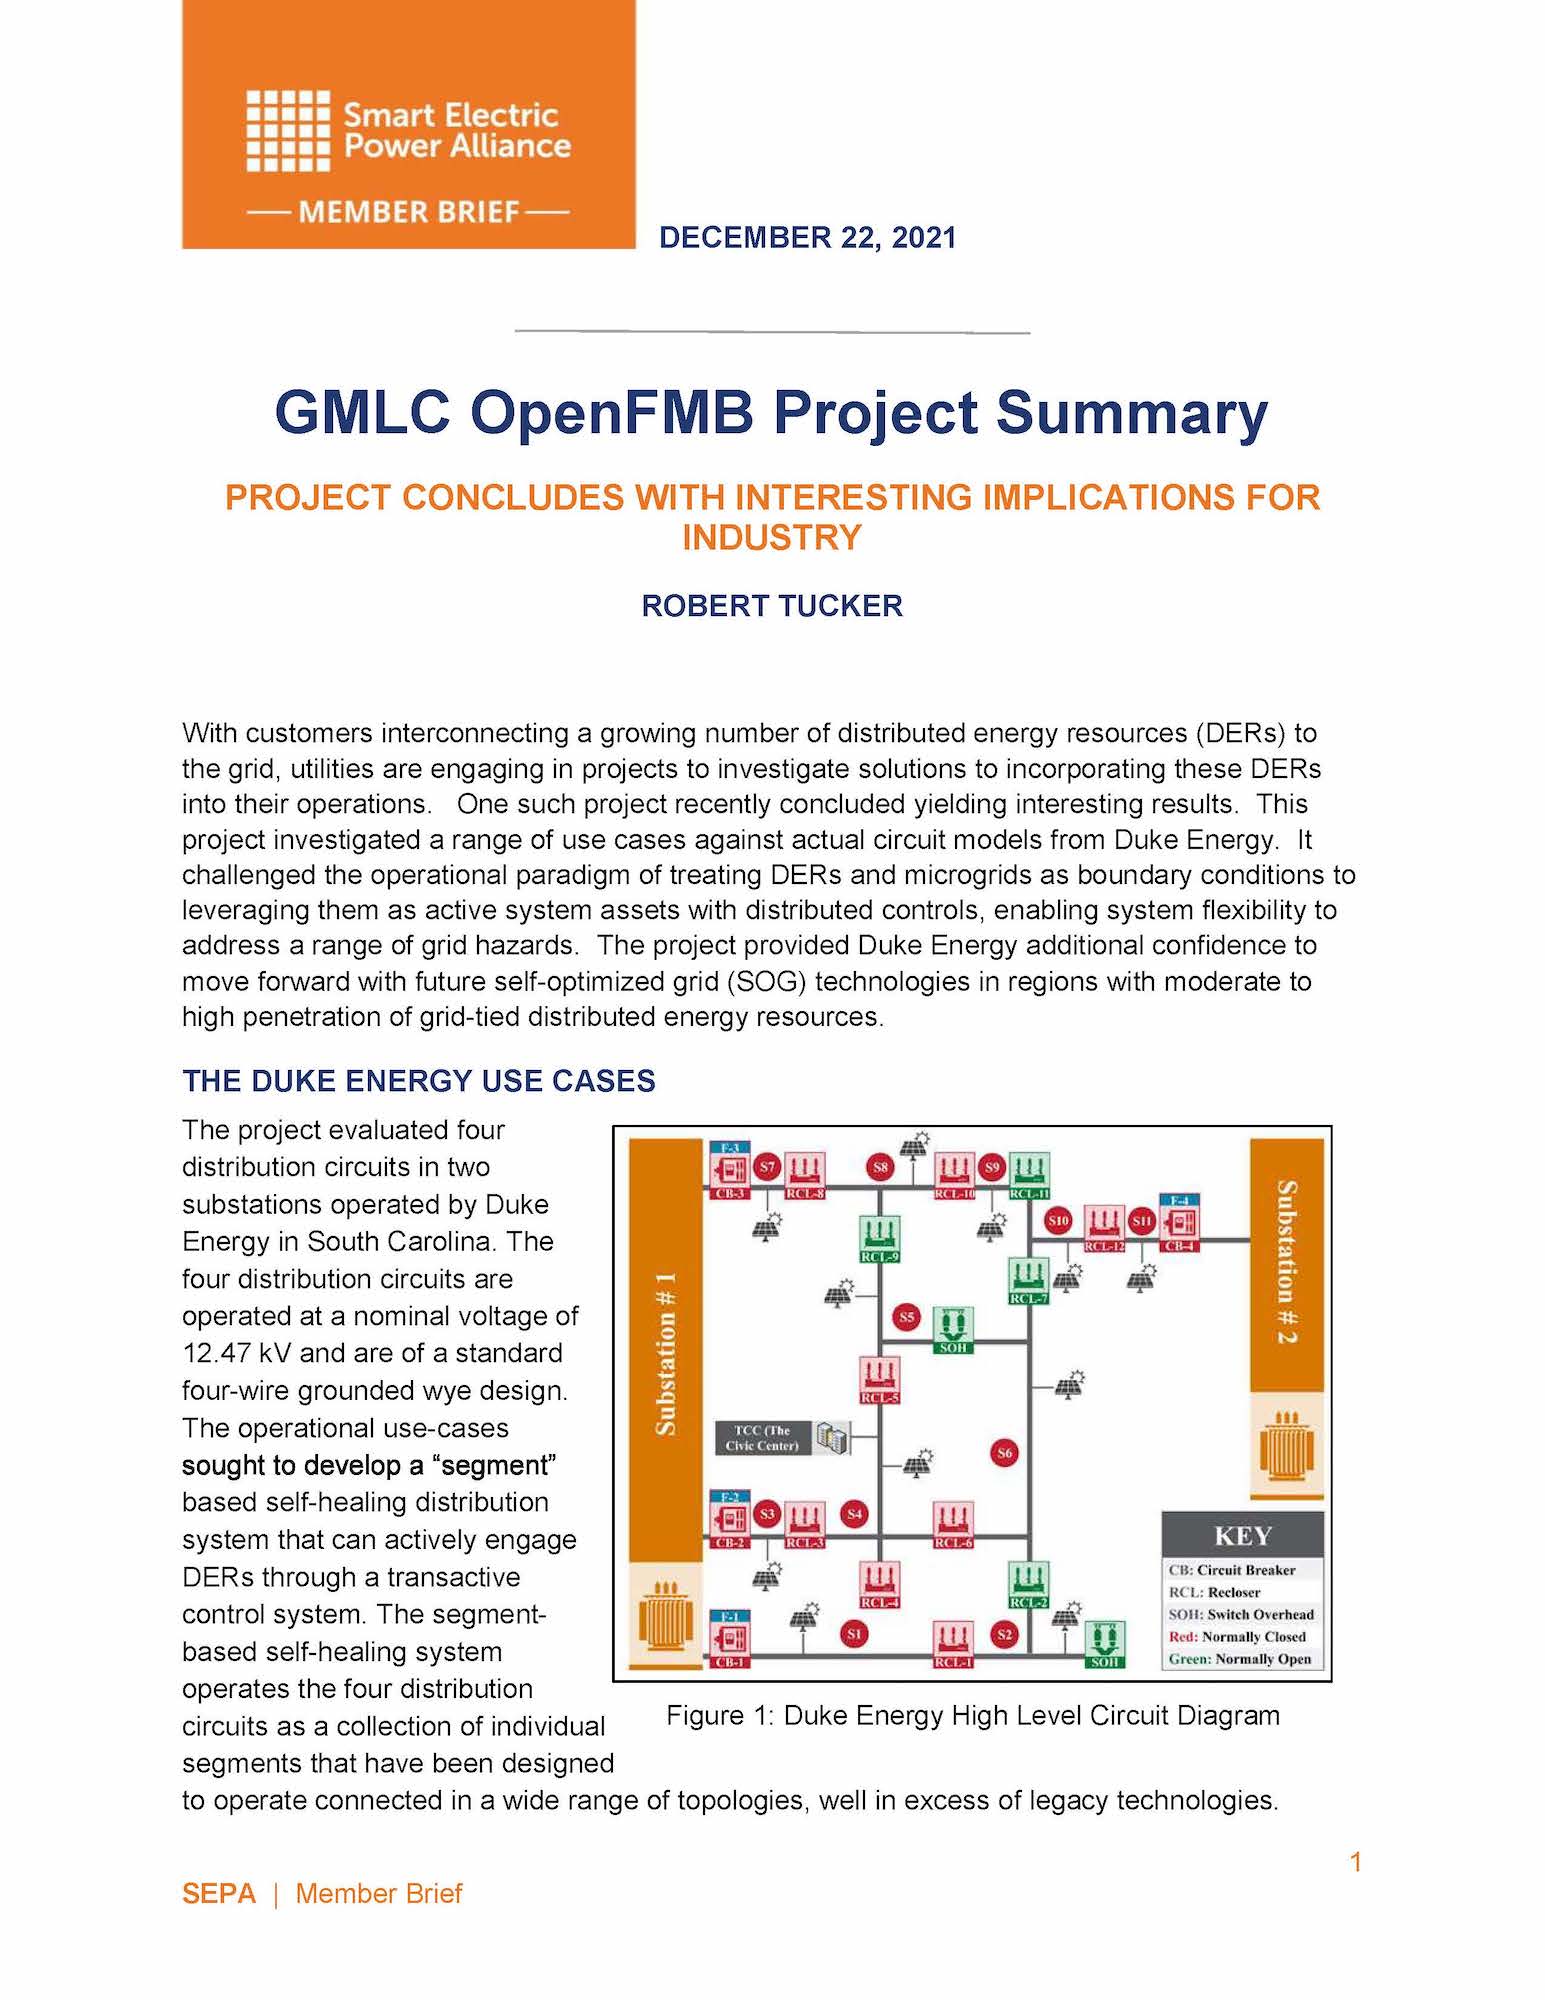 GMLC OpenFMB for Resiliency